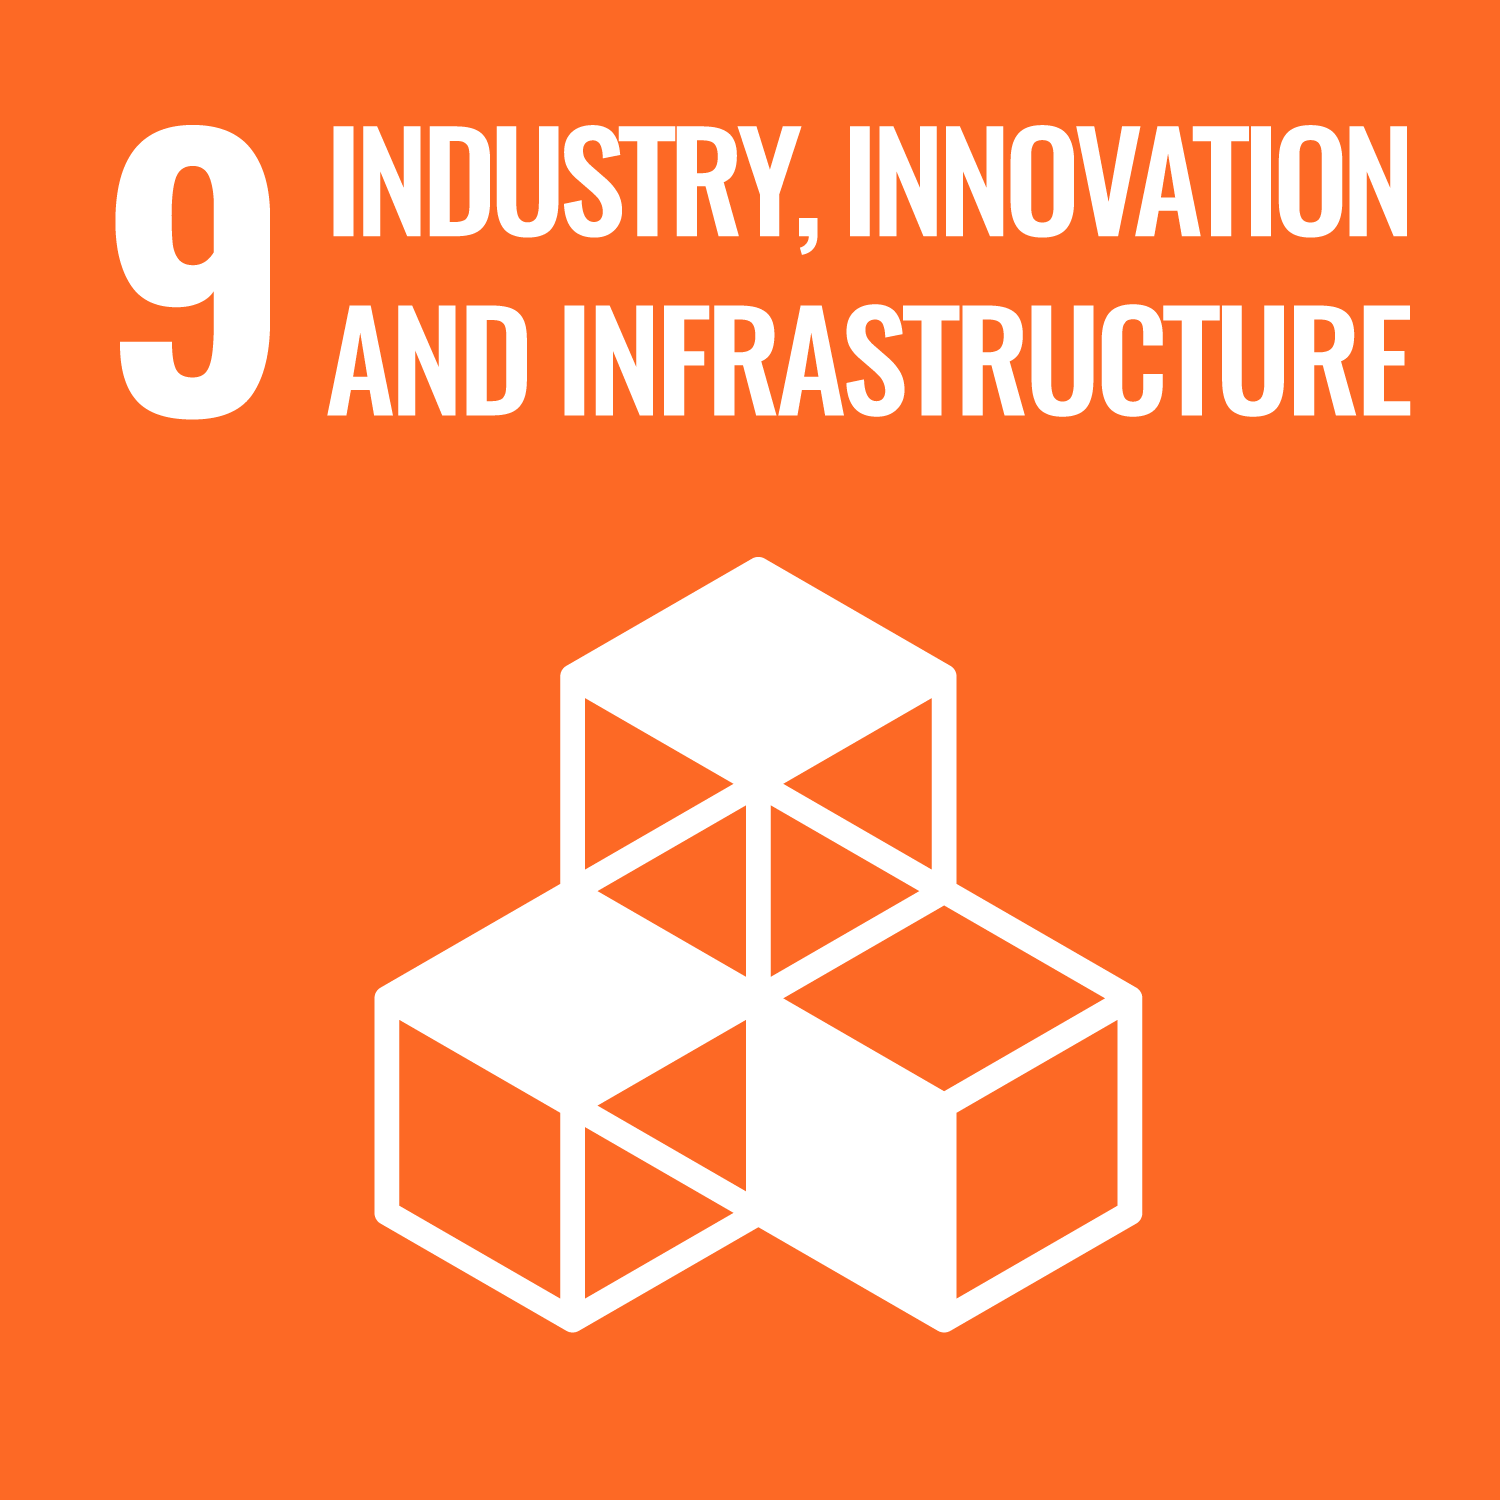 09. Industry, Innovation and Infrastructure